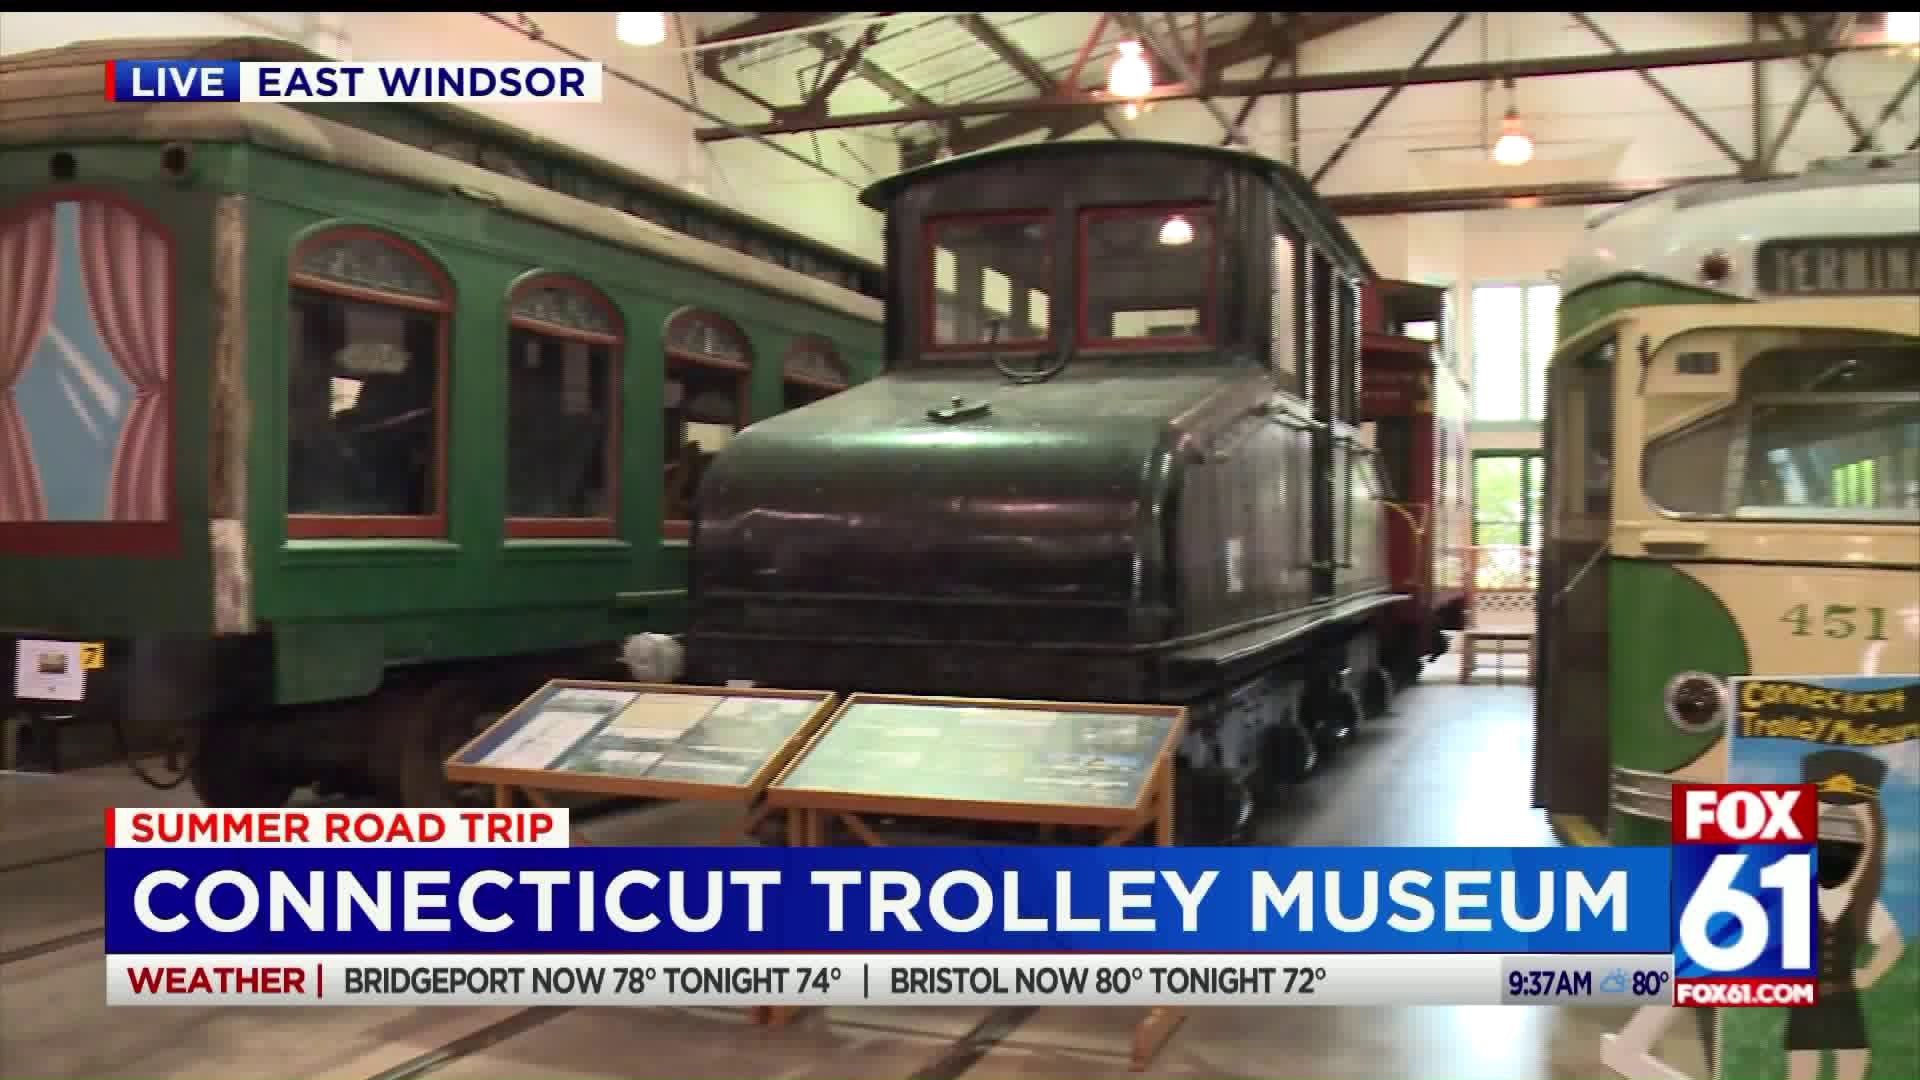 A ride into history at the Connecticut Trolley Museum